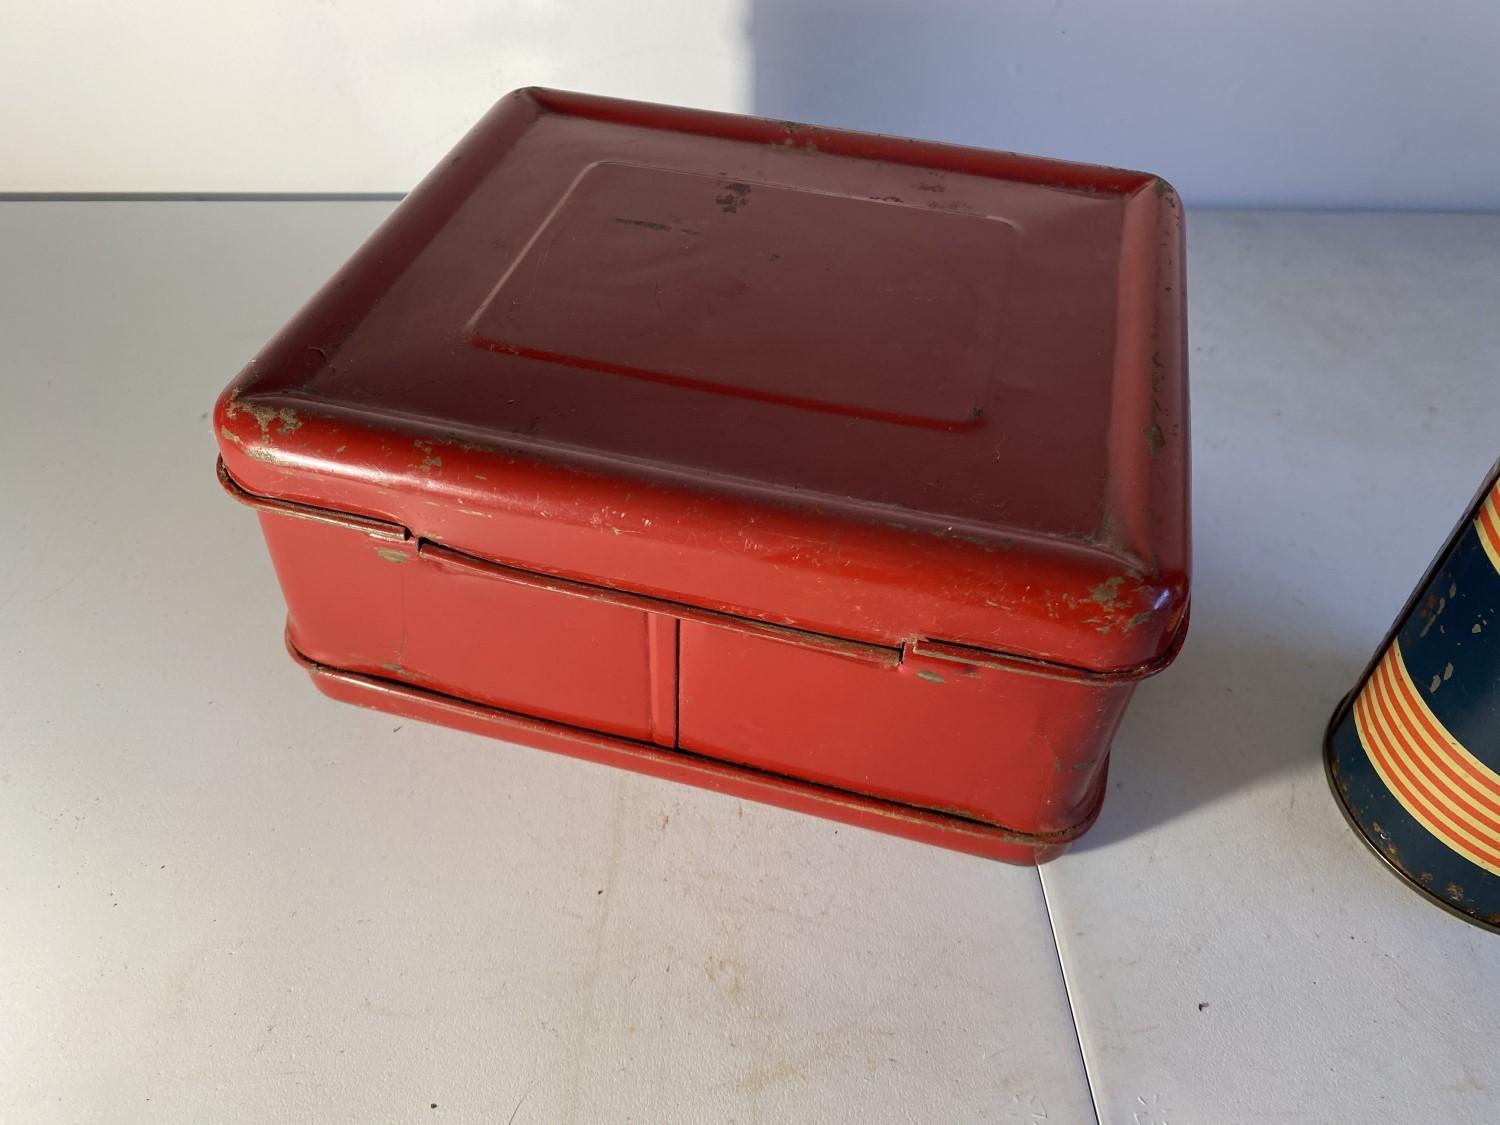 Vintage red metal lunchbox and thermos